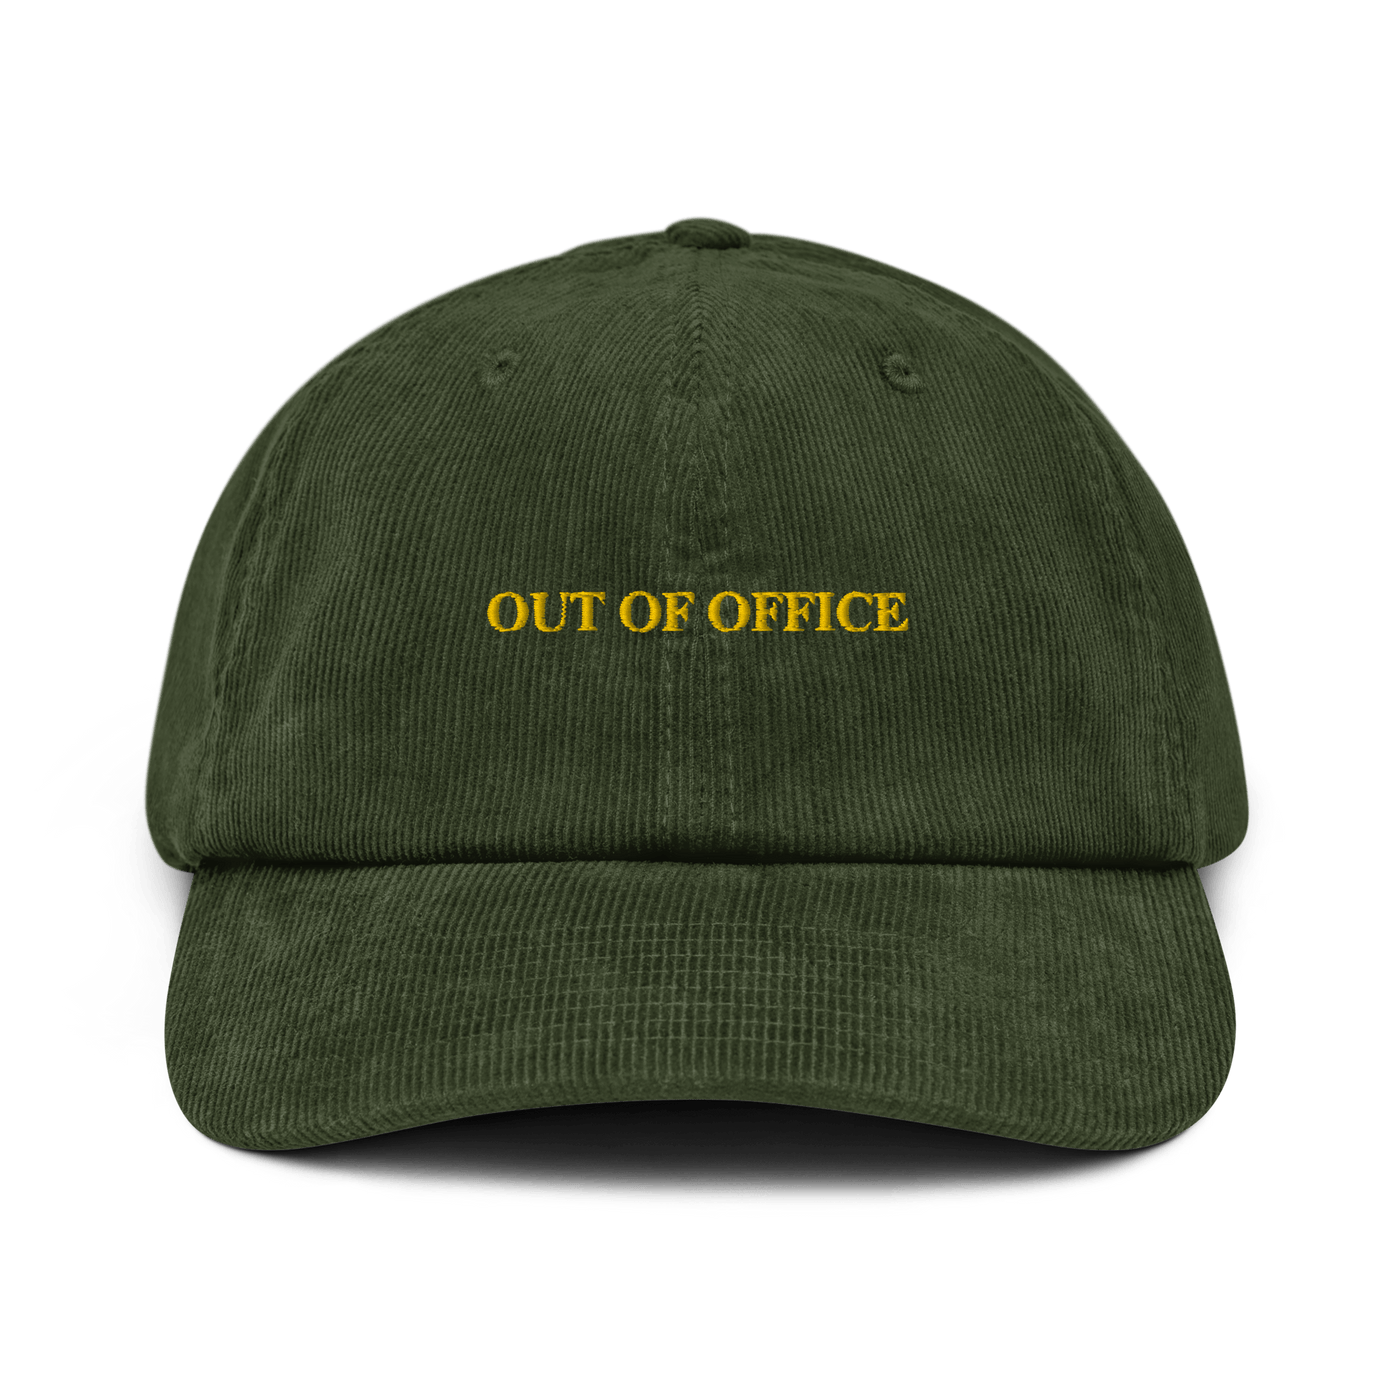 OUT OF OFFICE Corduroy hat - Dark Olive - - Just Another Cap Store